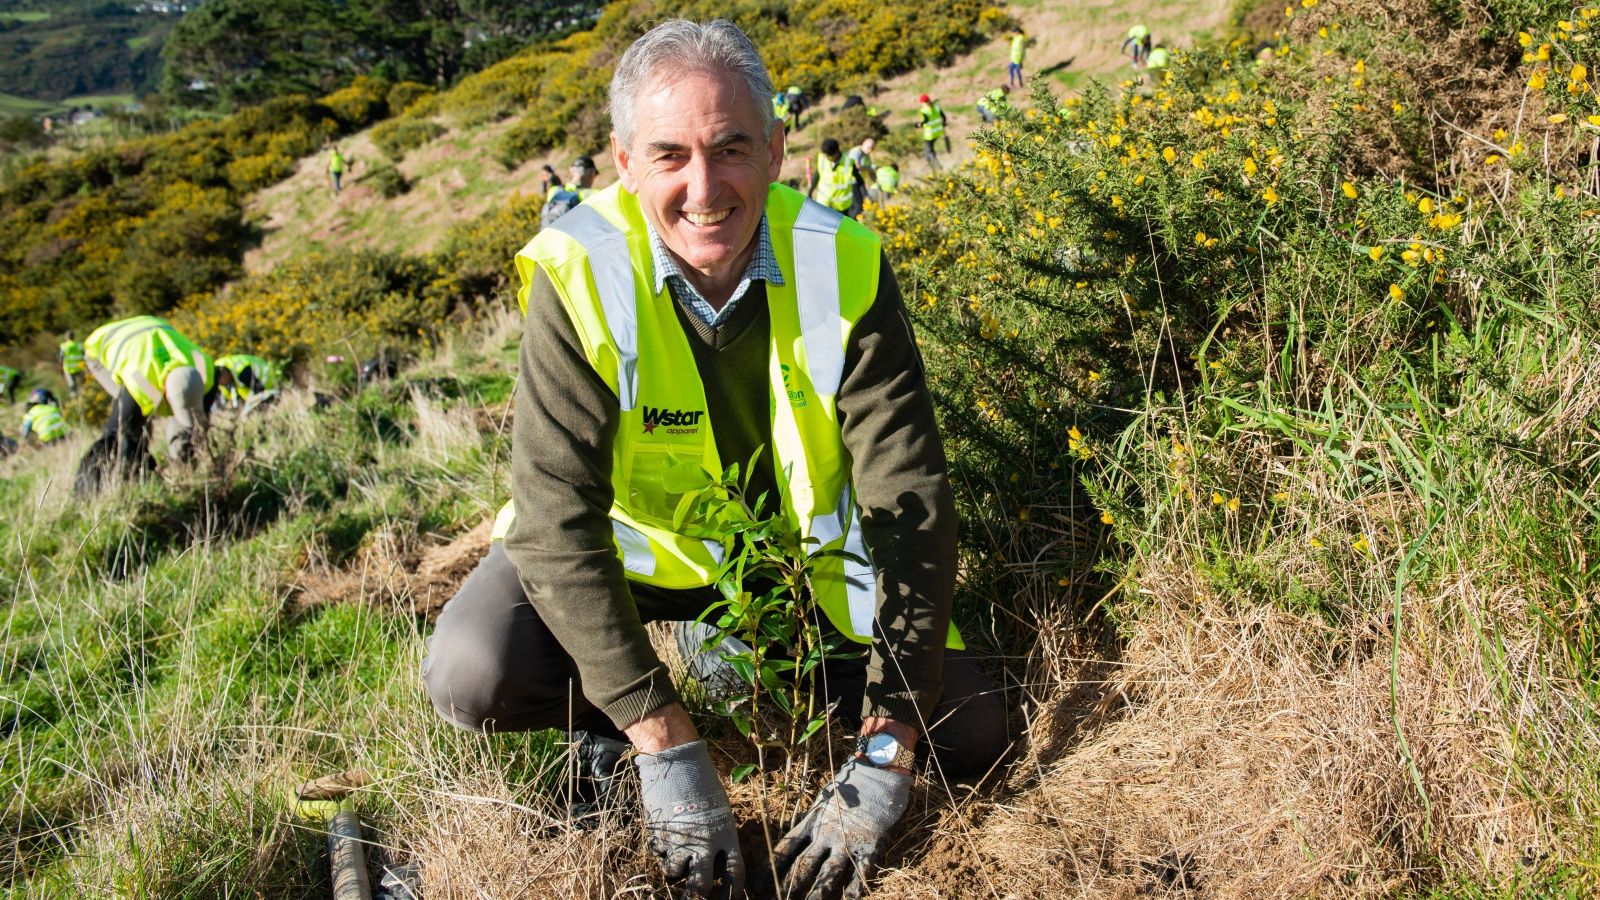 Man with grey hair smiling while putting plant in ground with gorse background